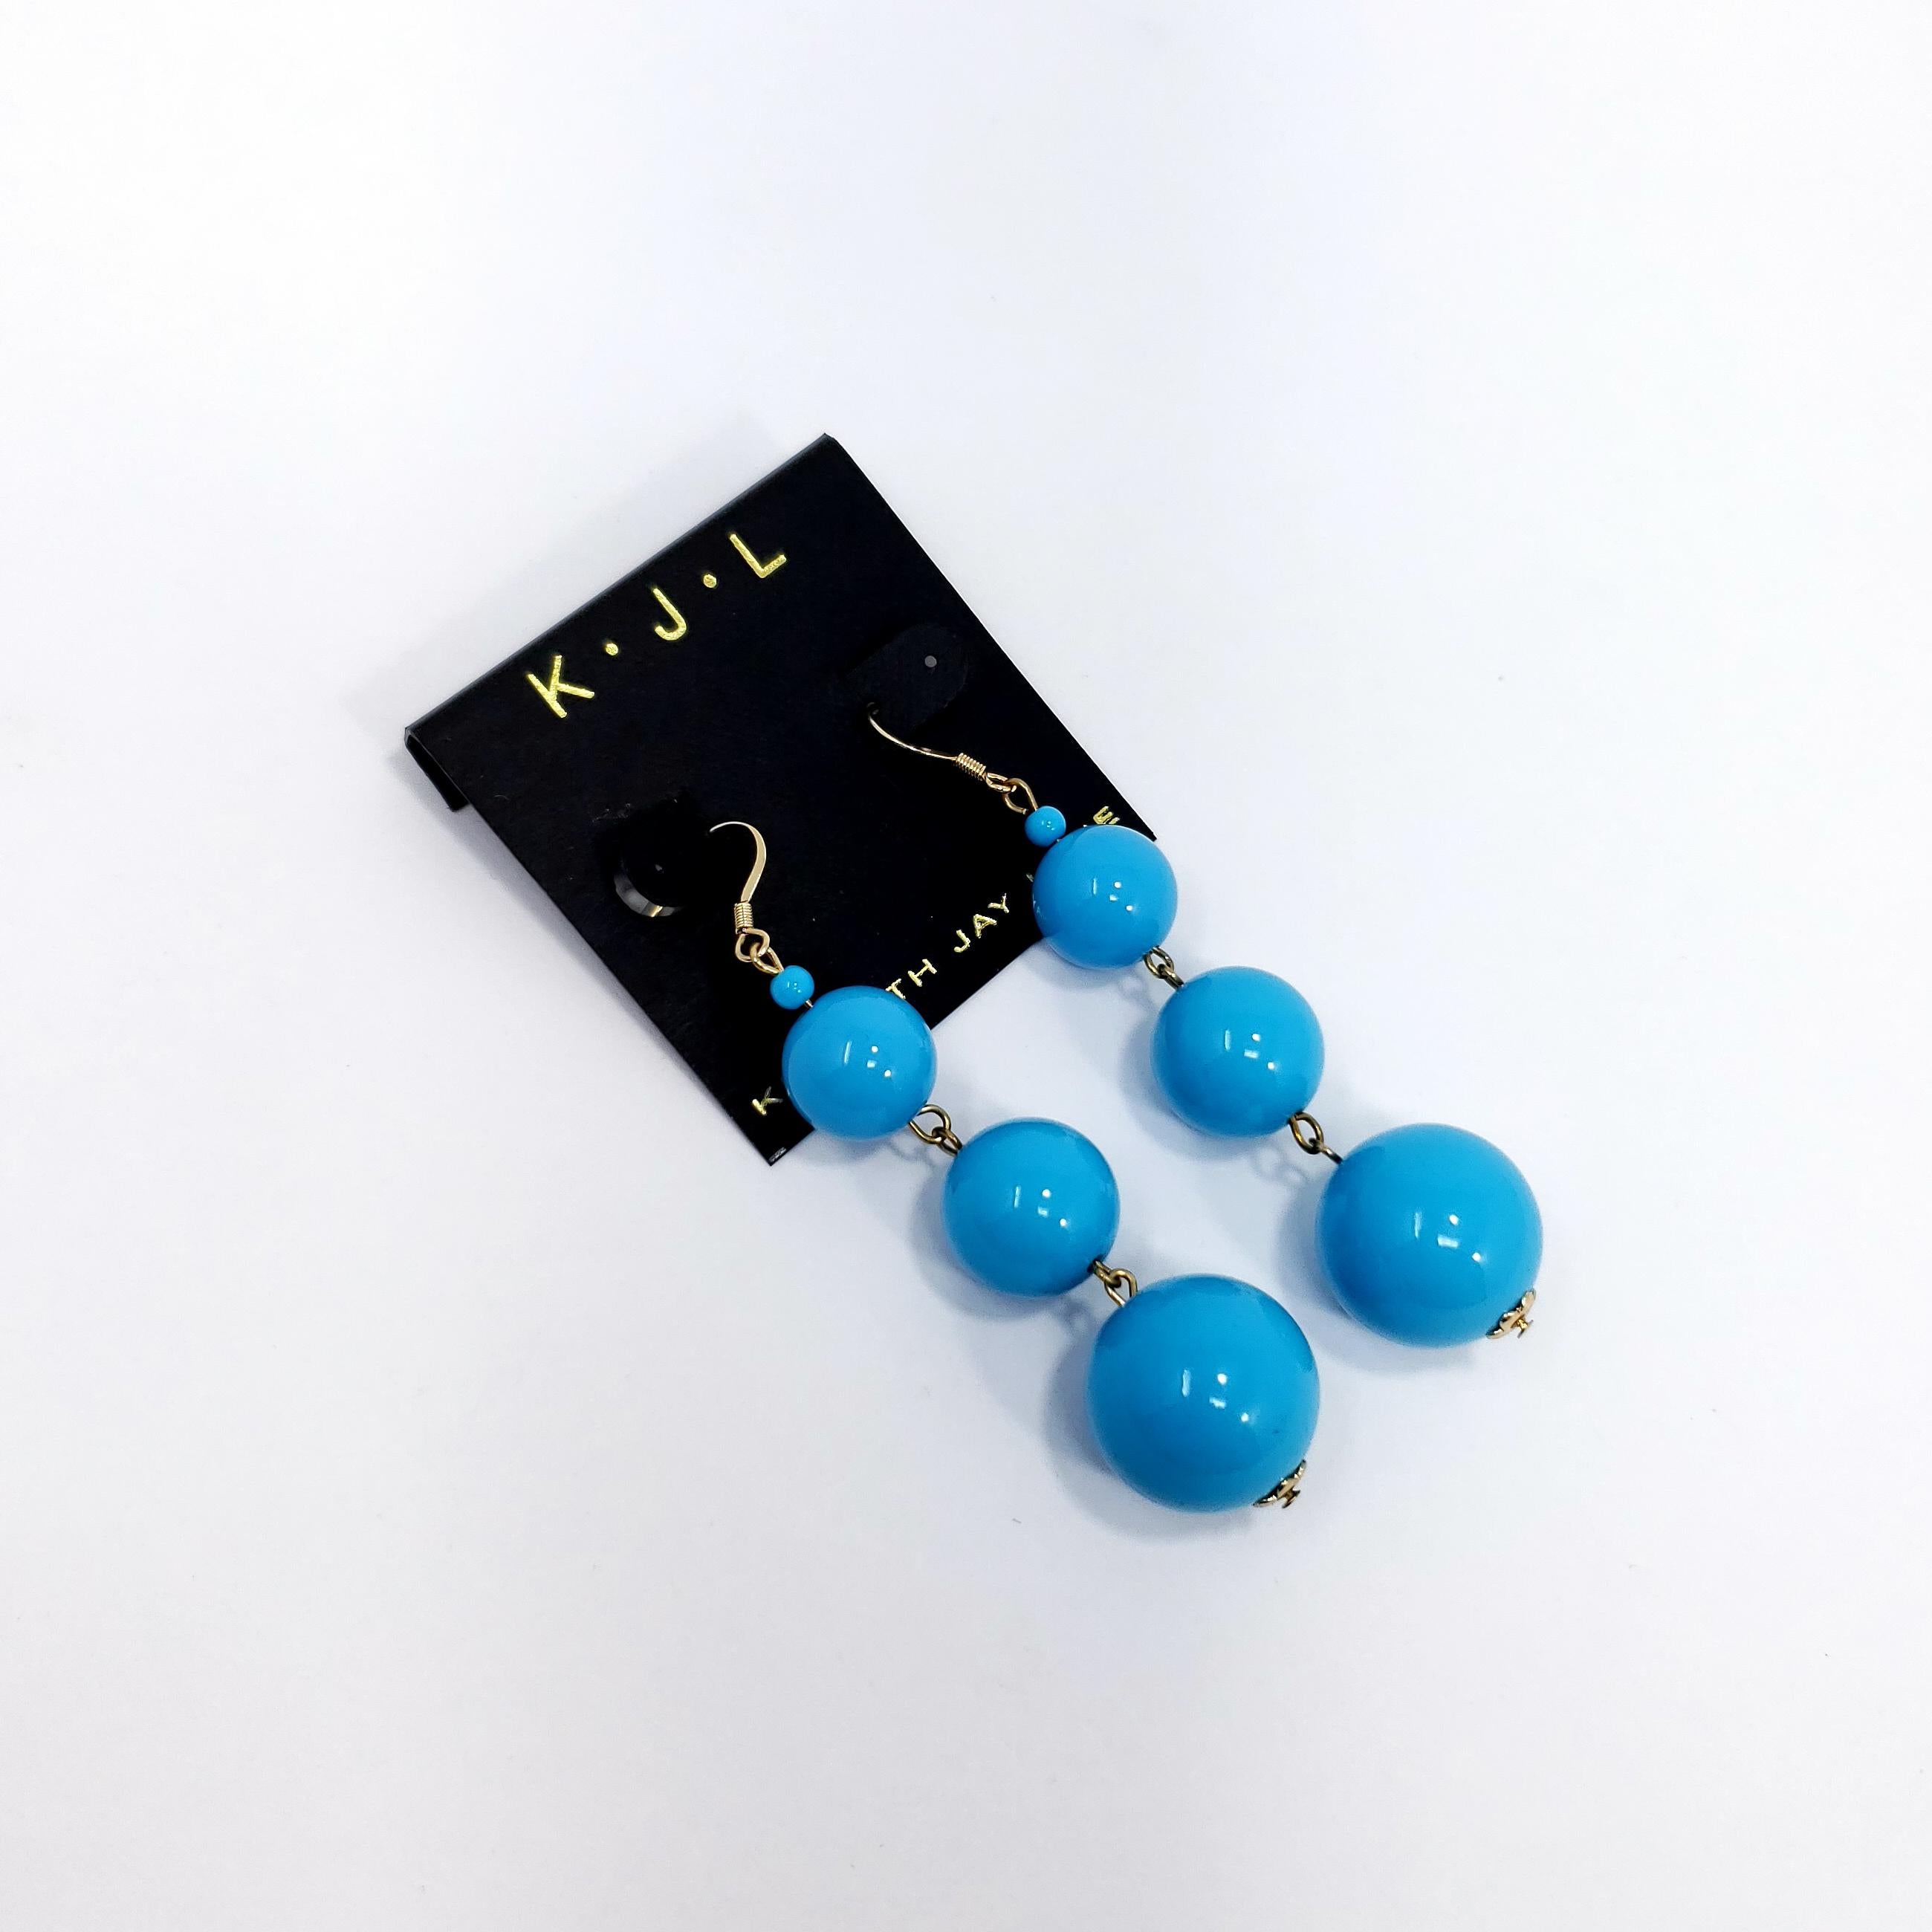 A pair of bright blue turquoise earrings. Three turquoise-blue graduated beads dangle from gold-plated hooks. By Kenneth Jay Lane.

8cm drop. Largest bead is 2cm large. 

Hallmarks: none